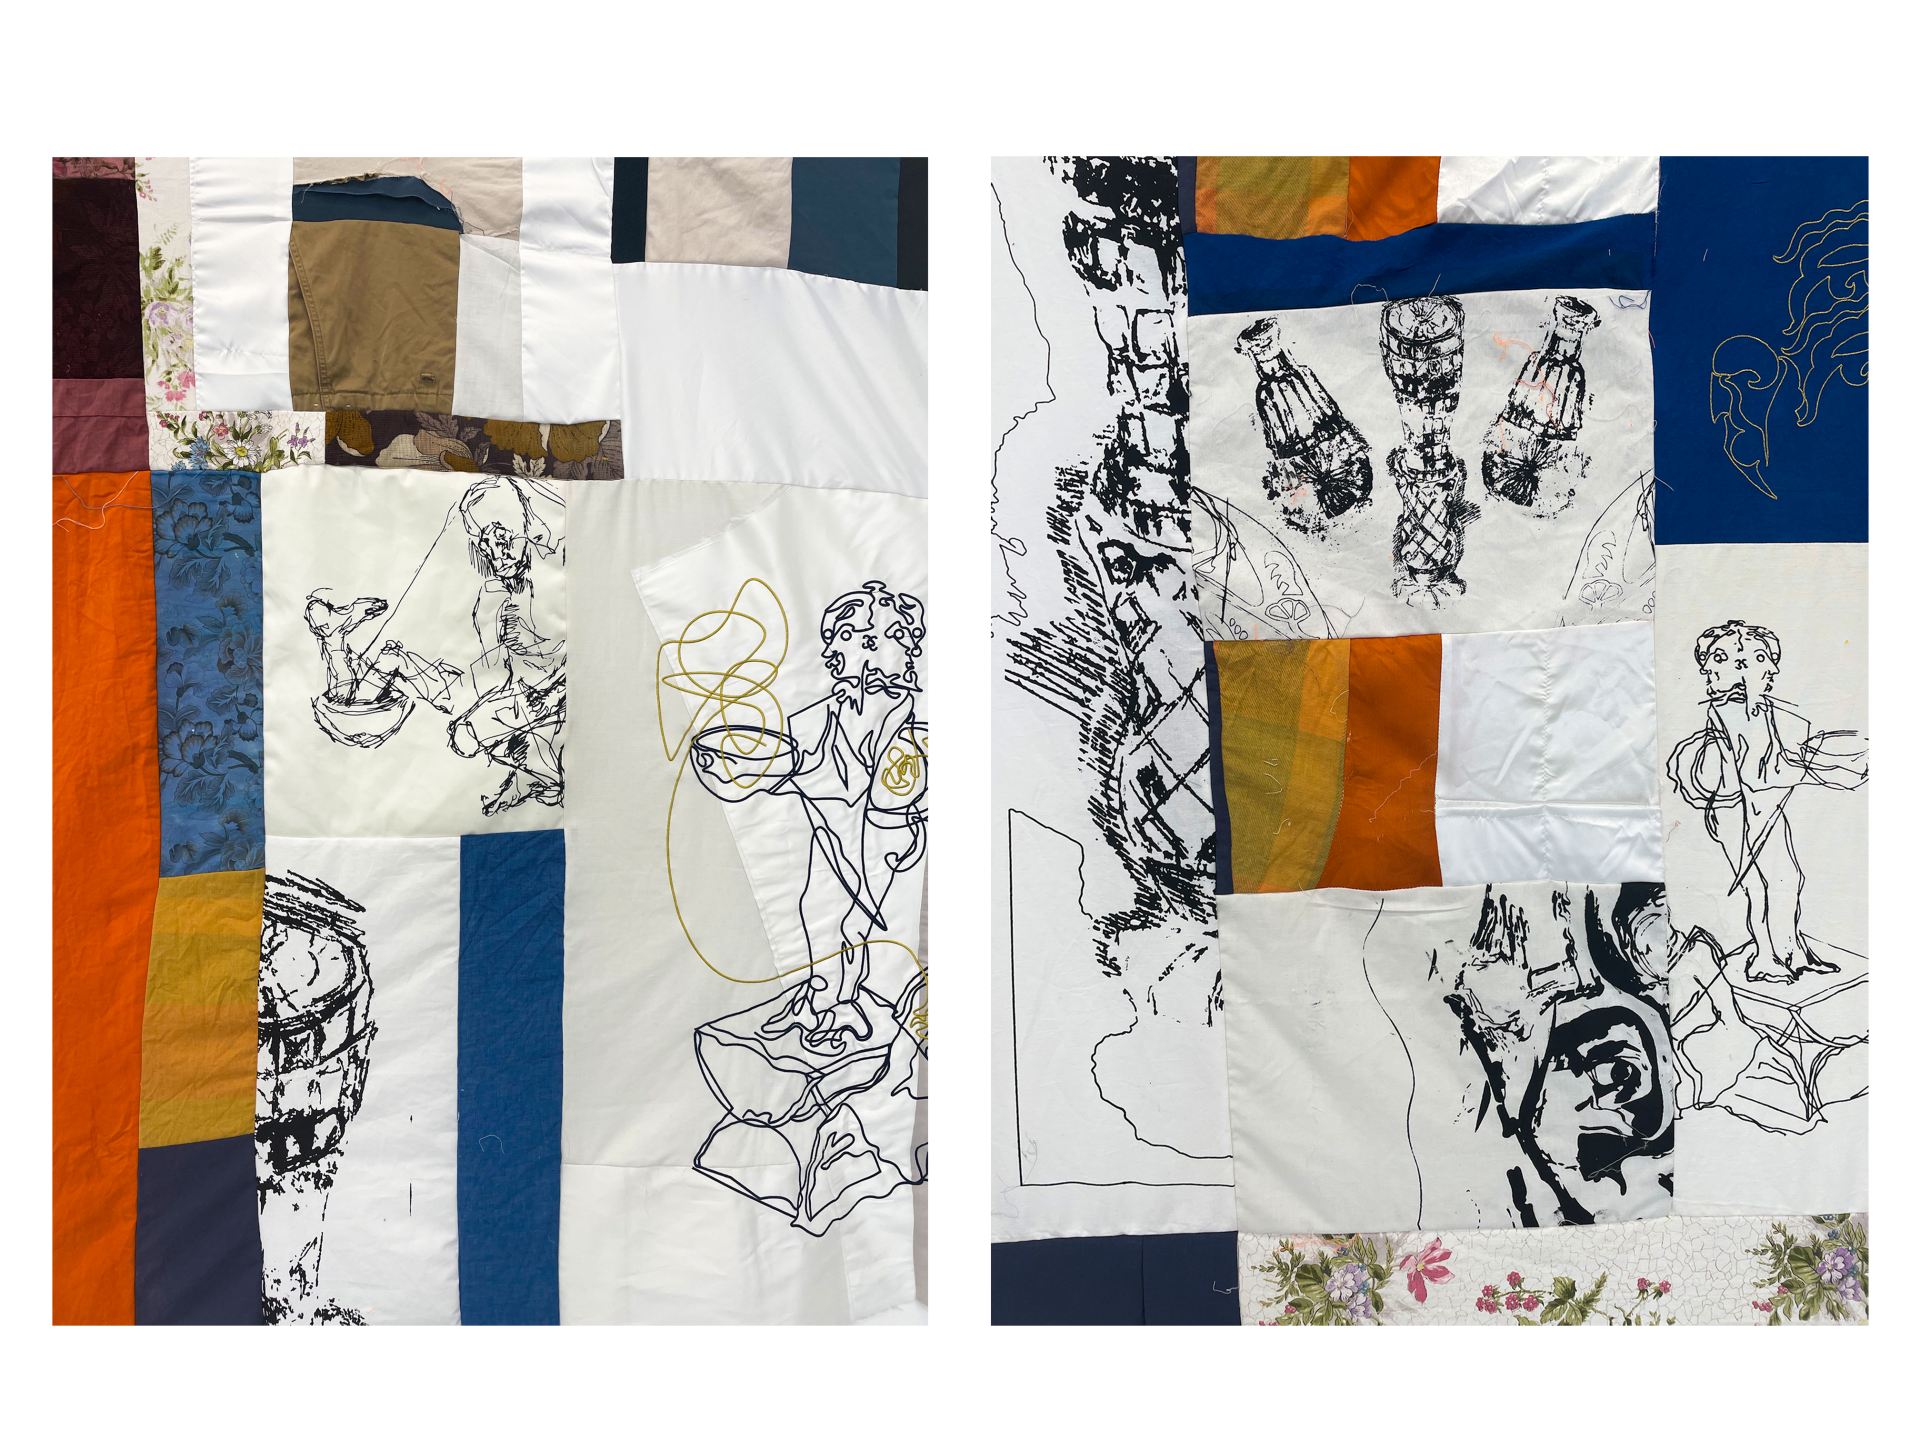 An image of several black and white abstract drawings on fabric.